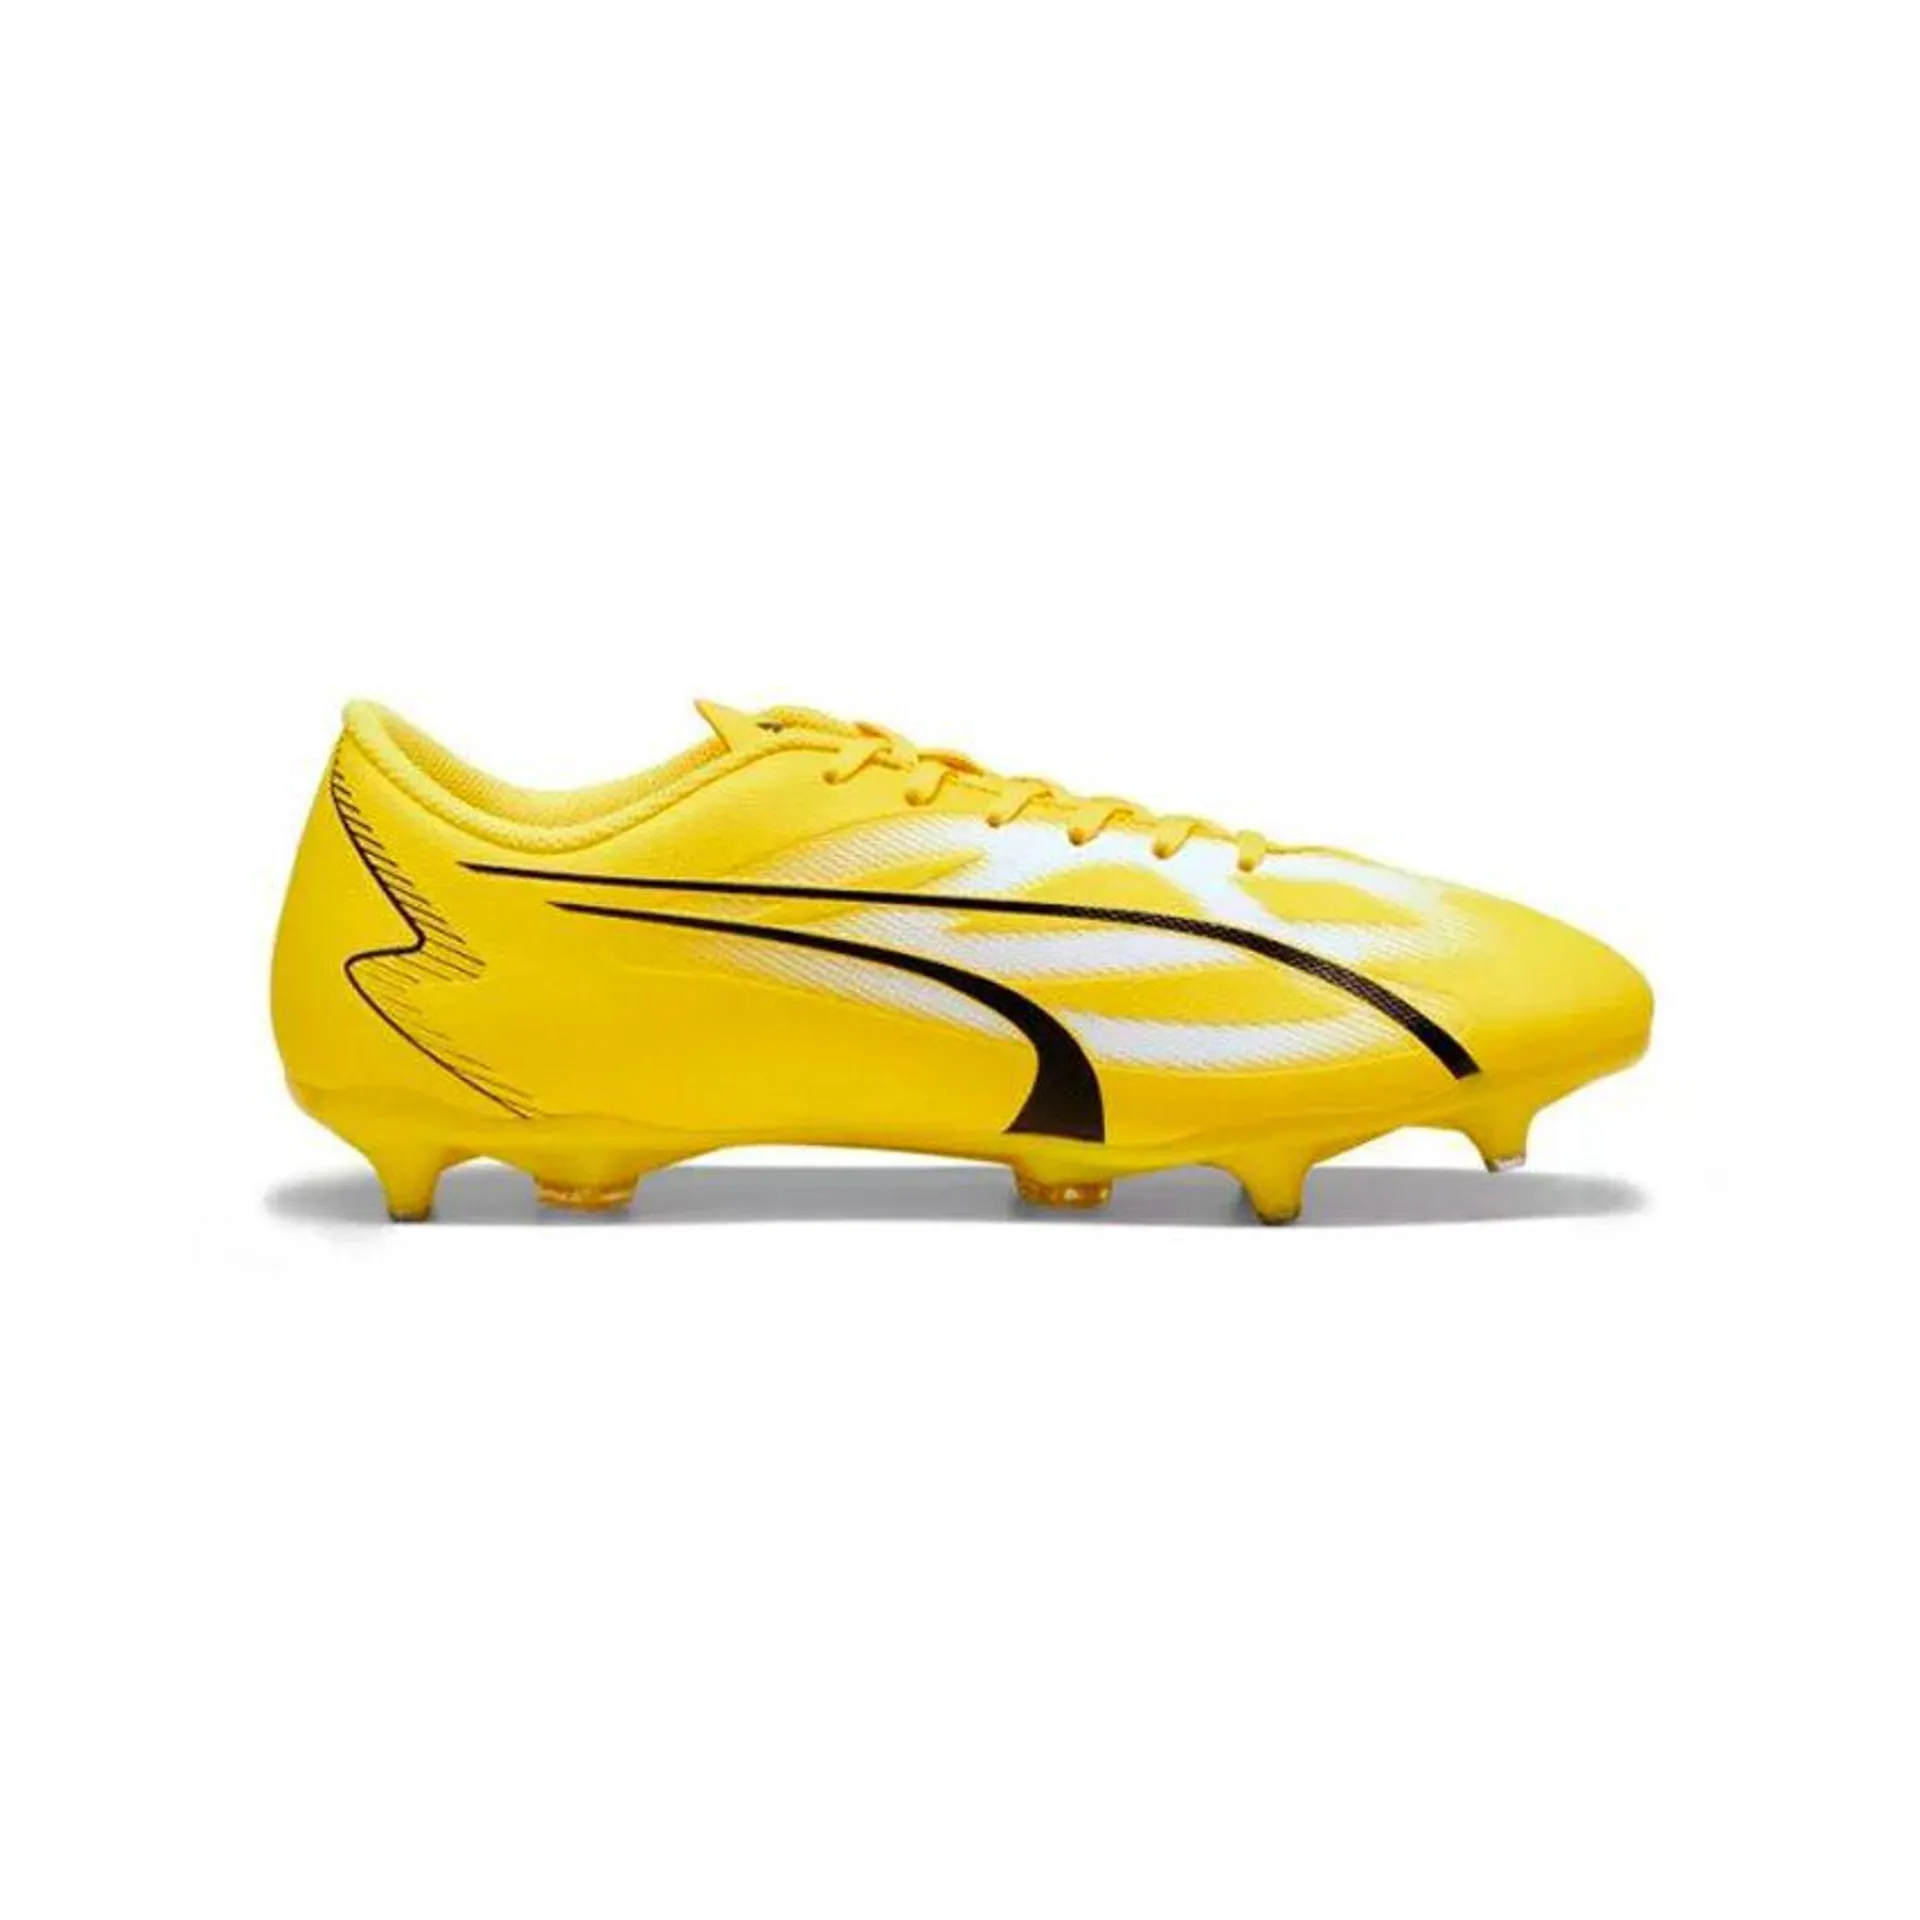 Chaussures Rugby Ultra Play FG Crampons Hybrides Tout terrain Jaune - Puma